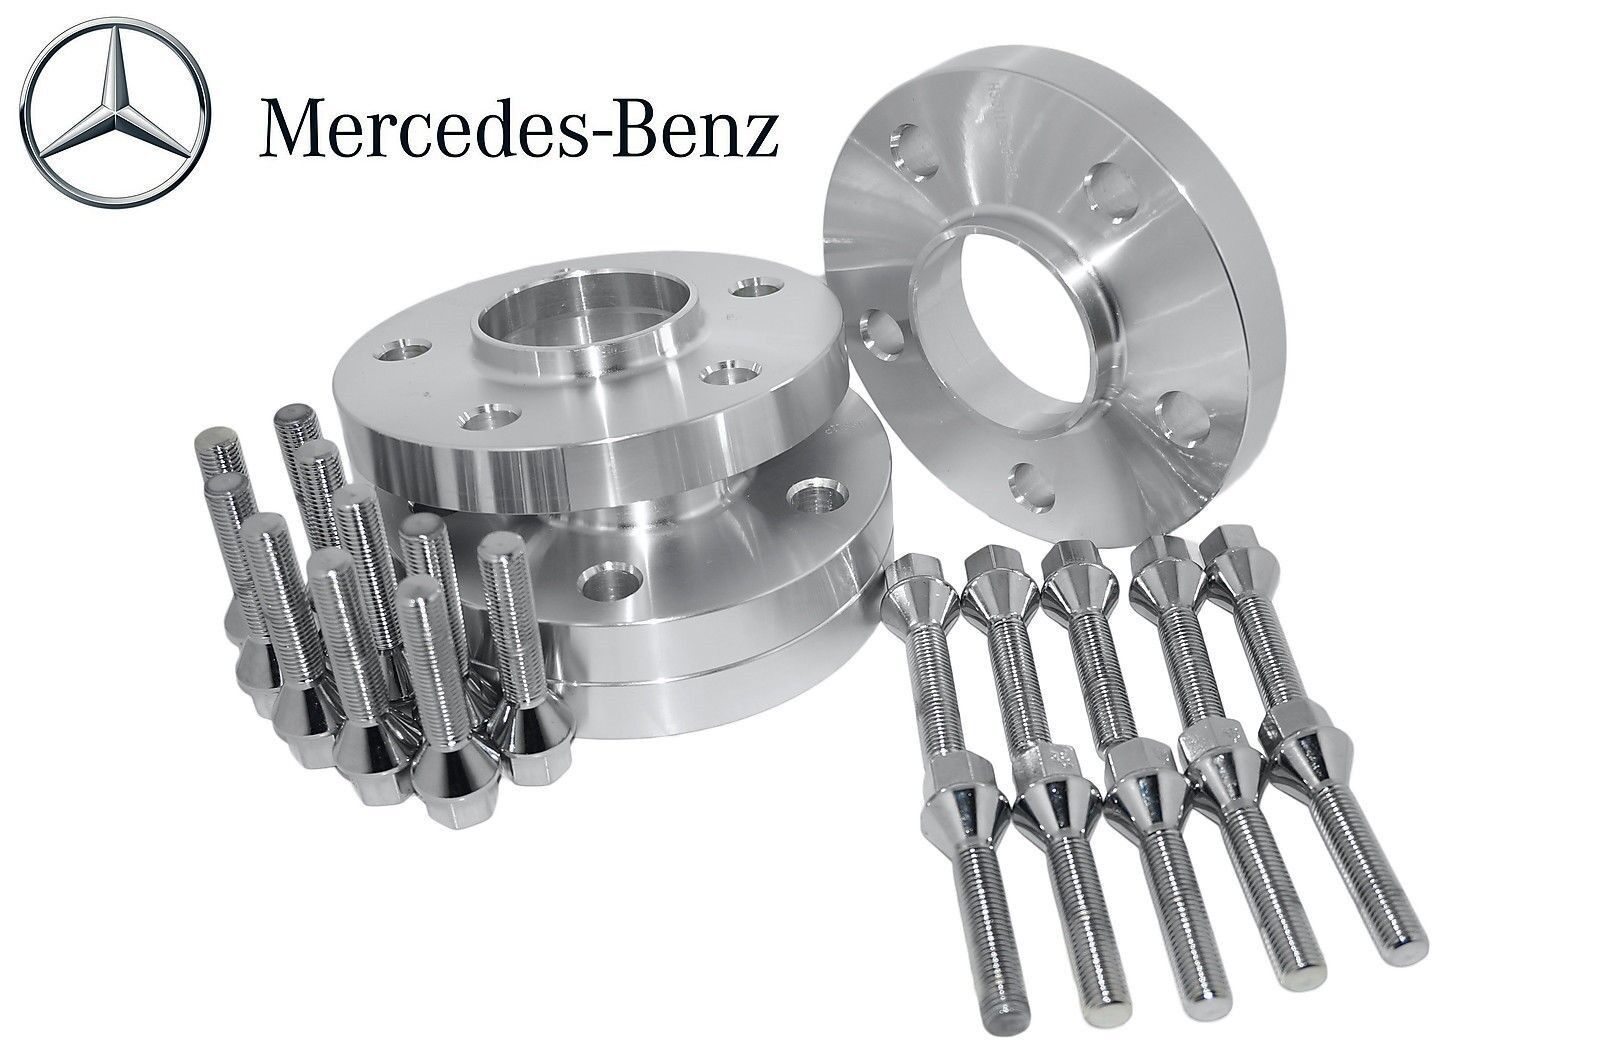 Complete Set 15mm Thick Mercedes Benz Hub Centric Wheel Spacers W/ Lug Bolts